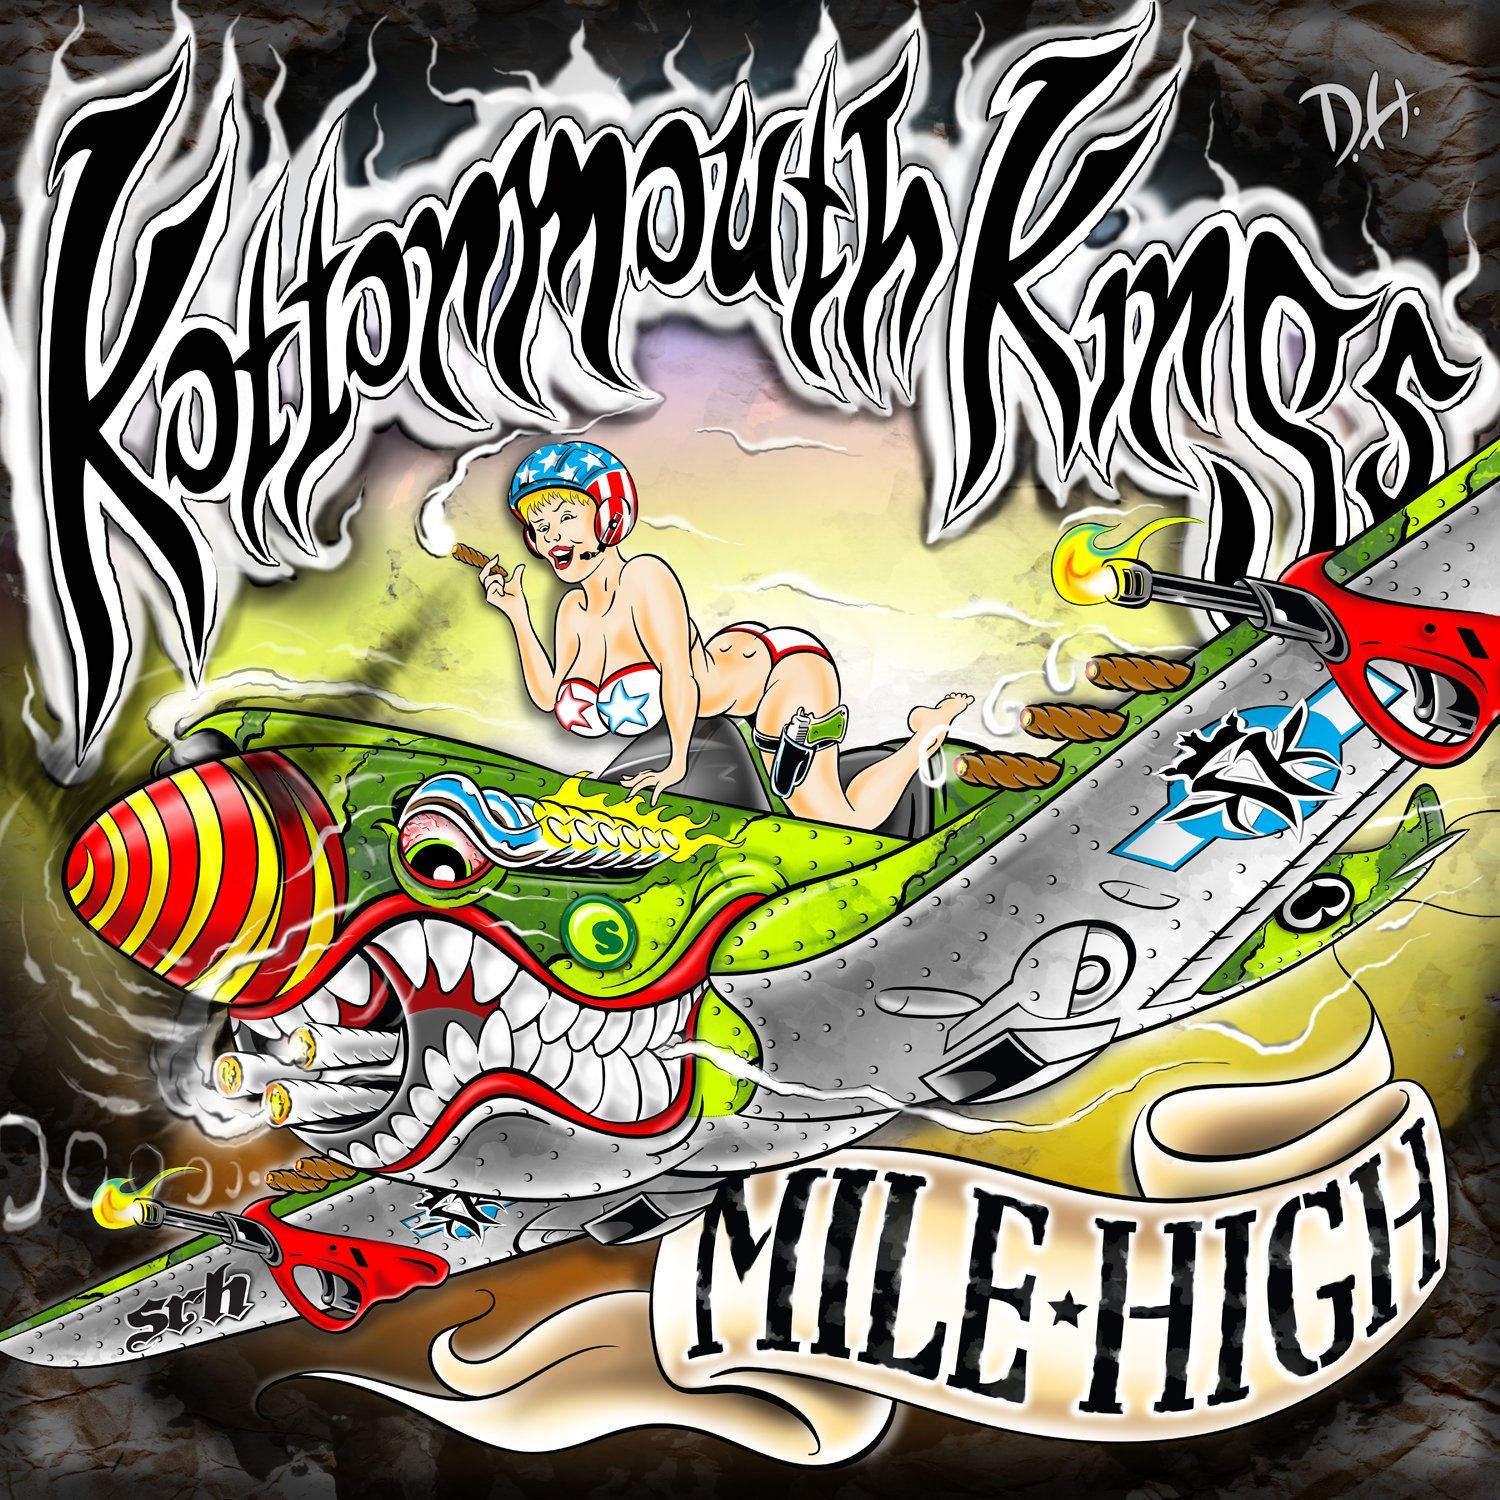 News Added Aug 02, 2012 Kottonmouth Kings are more than just a group; they're an institution ingrained into the fabric of the underground independent music scene. They've transcended labels and stereotypes to become pioneers and vanguards that have helped inspire and revolutionize the music industry. Throughout the Kottomouth King's 15-year career, they have refused to […]